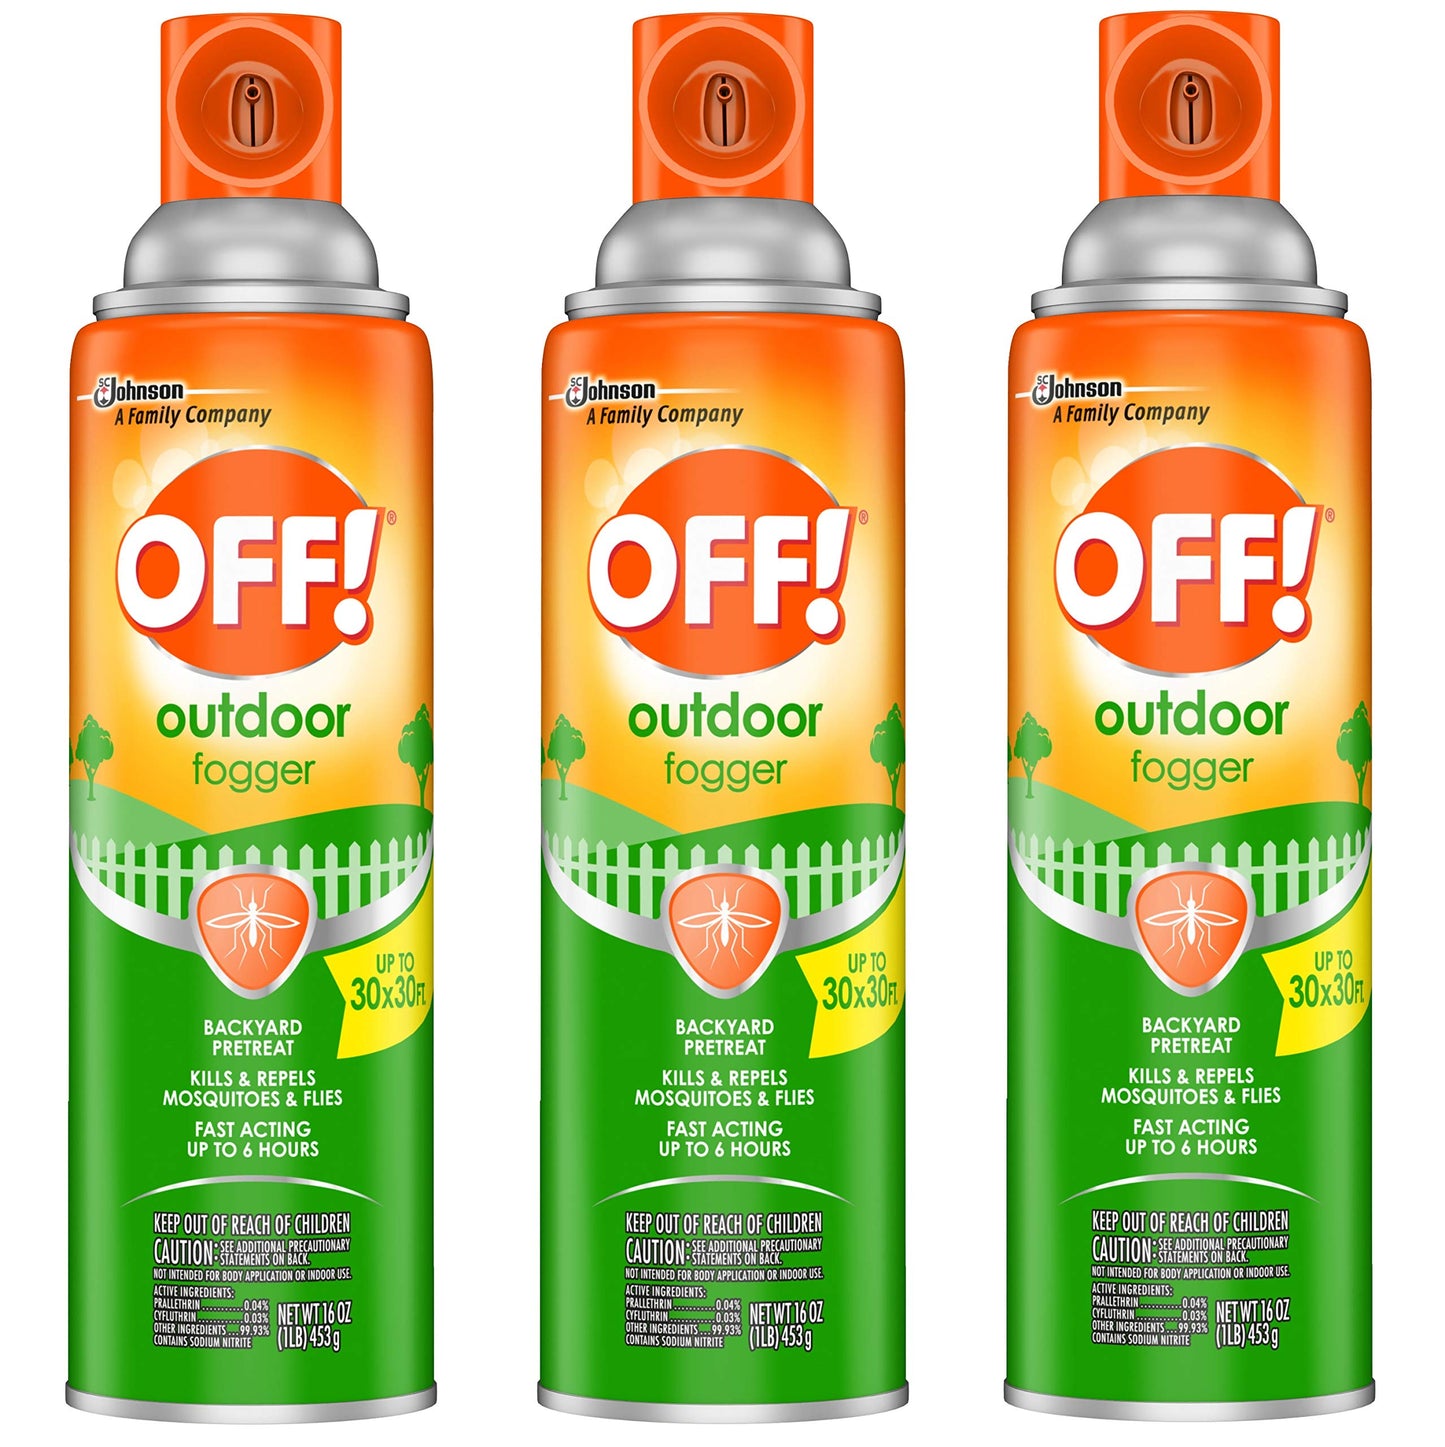 OFF! Outdoor Fogger, 16 OZ Mosquito and Fly Repellant (Pack - 3)